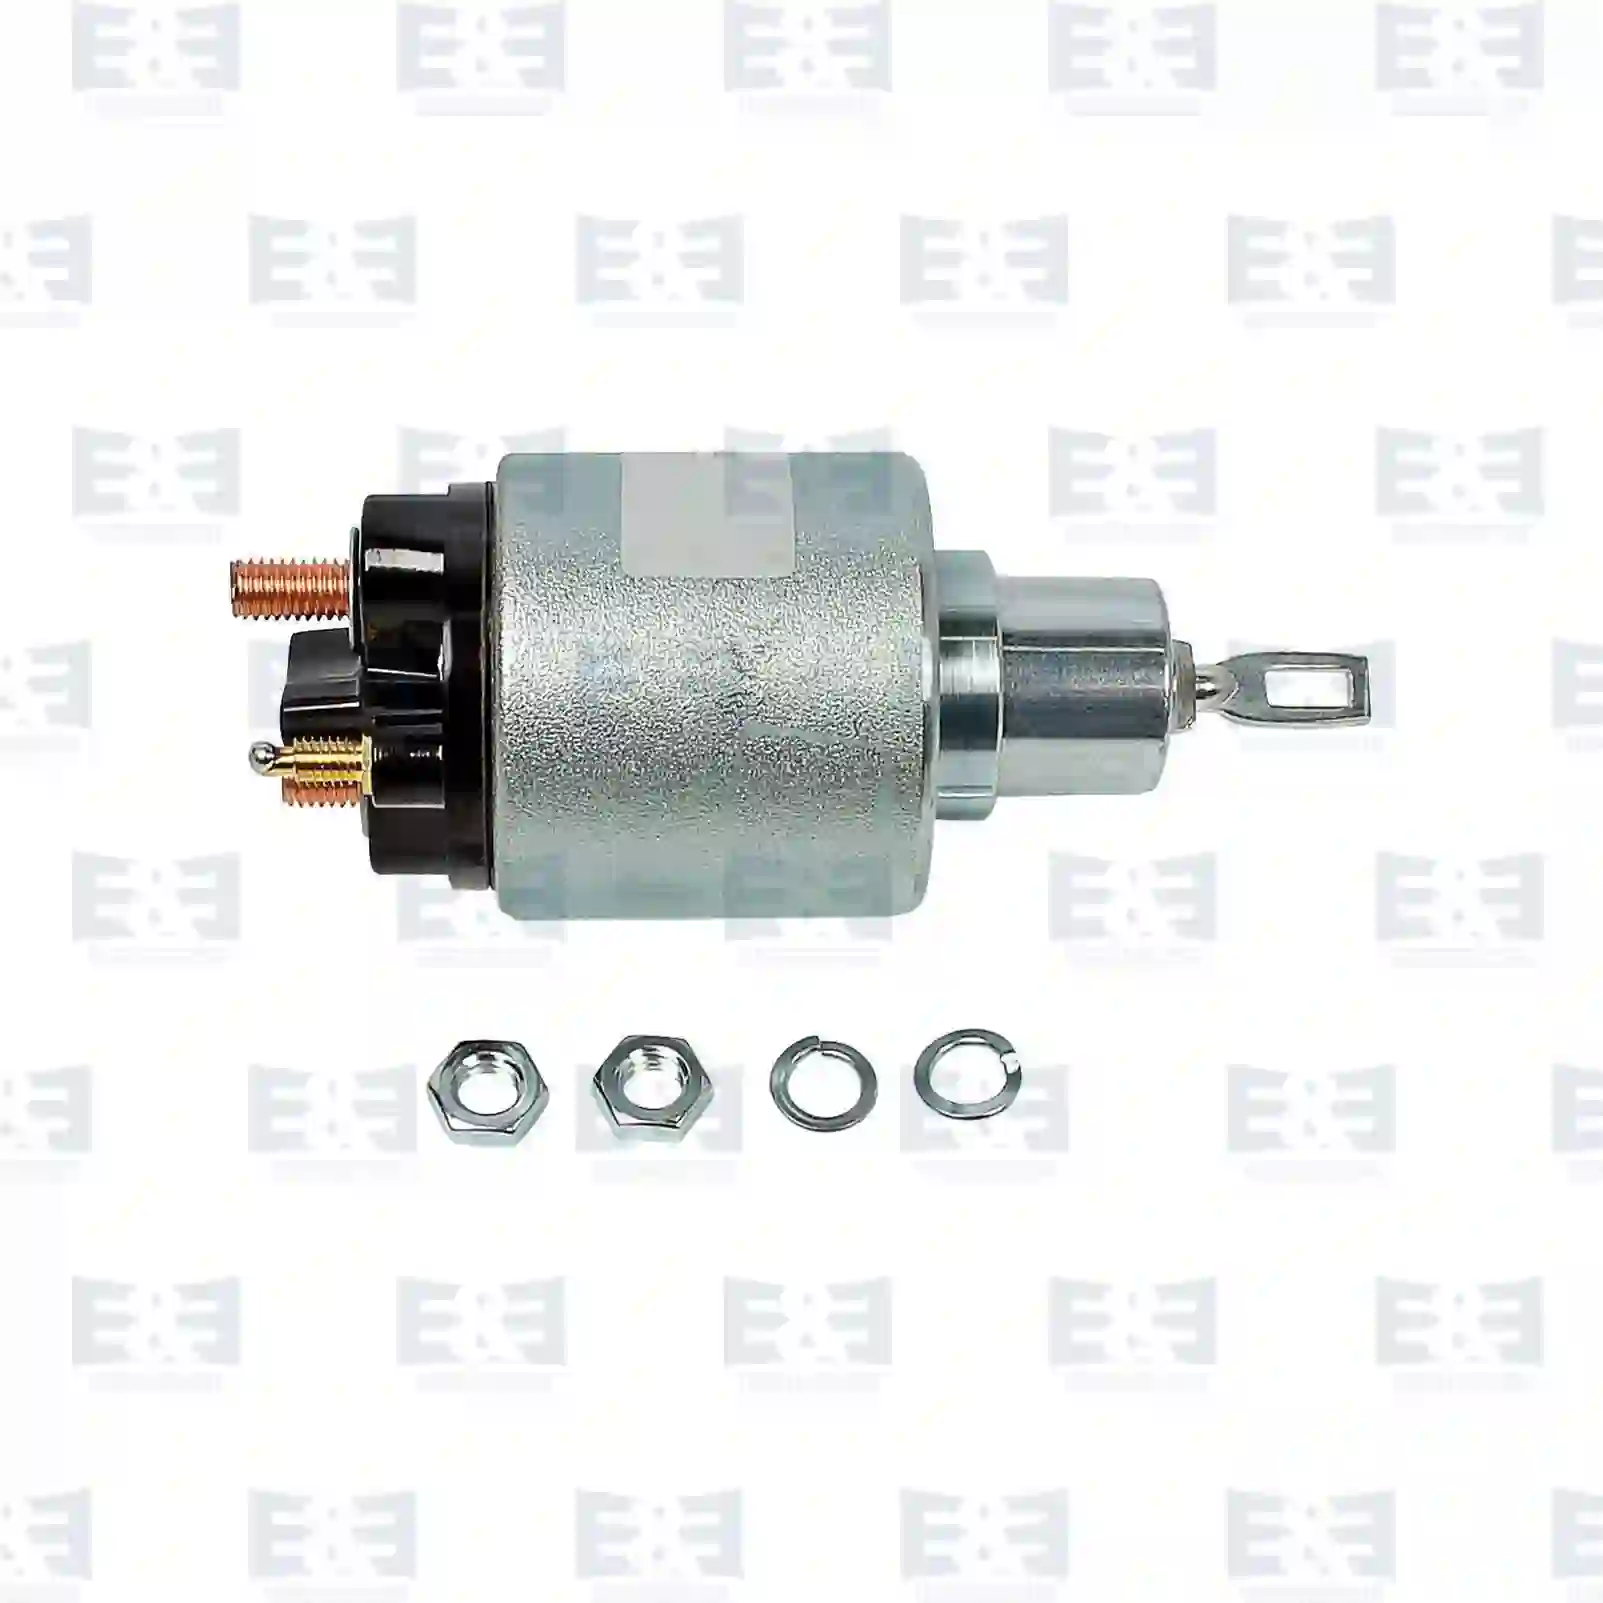 Starter Motor Solenoid switch, EE No 2E2290207 ,  oem no:1008838S, 1416227S, 5021206S, 5023598S, 6157878, 6158996, 6994100S, 7085852S, 86AB-11390-AA, 86GB-11000-HAS, 87BB-11000-JAS, 87BB-11000-JBS, 91BB-11000-HAS, 91BB-11000-HBS, 95GB-11000-CAS, 95GB-11000-EAS, 95GX-11000-EA1S, R95GX-11000-EA1S E&E Truck Spare Parts | Truck Spare Parts, Auotomotive Spare Parts